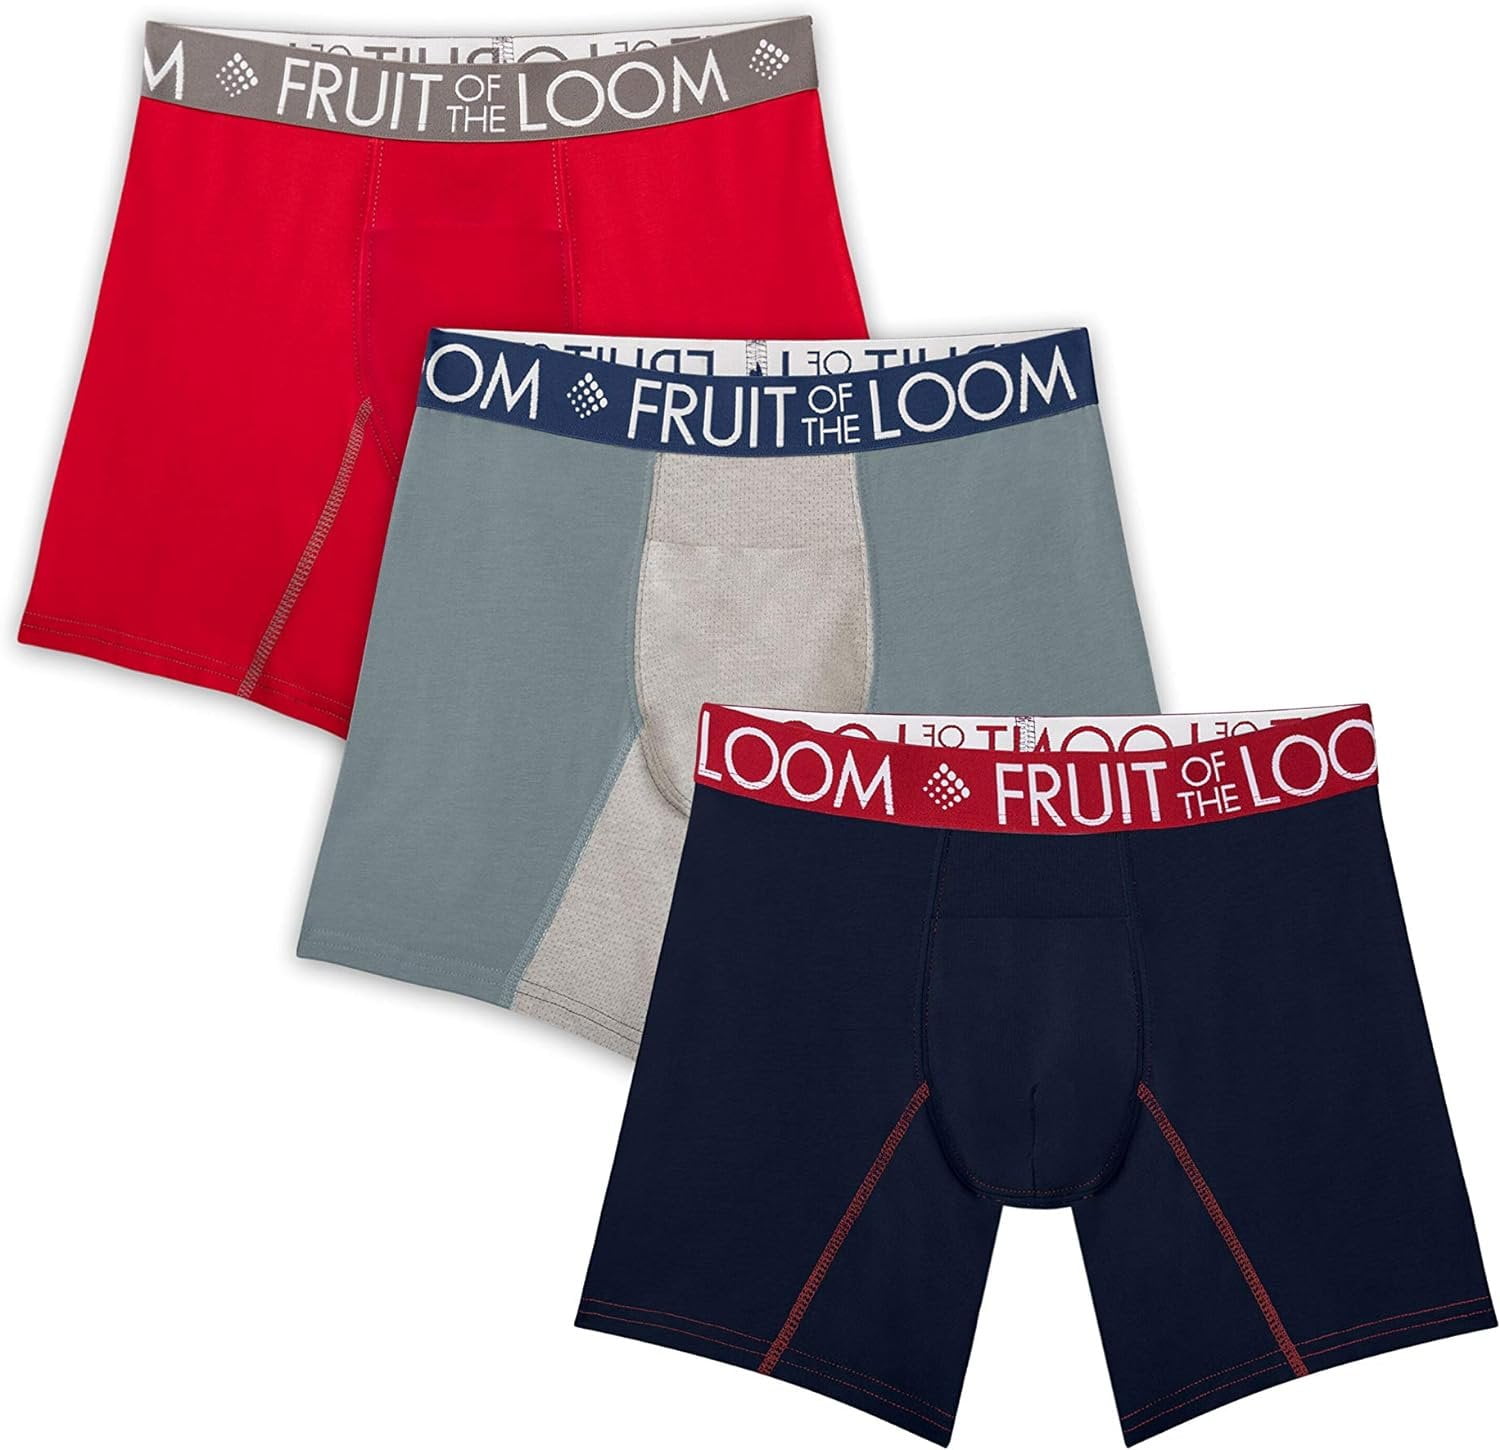 Fruit of the Loom Men's Breathable Performance Boxer Briefs, 3 Pack 